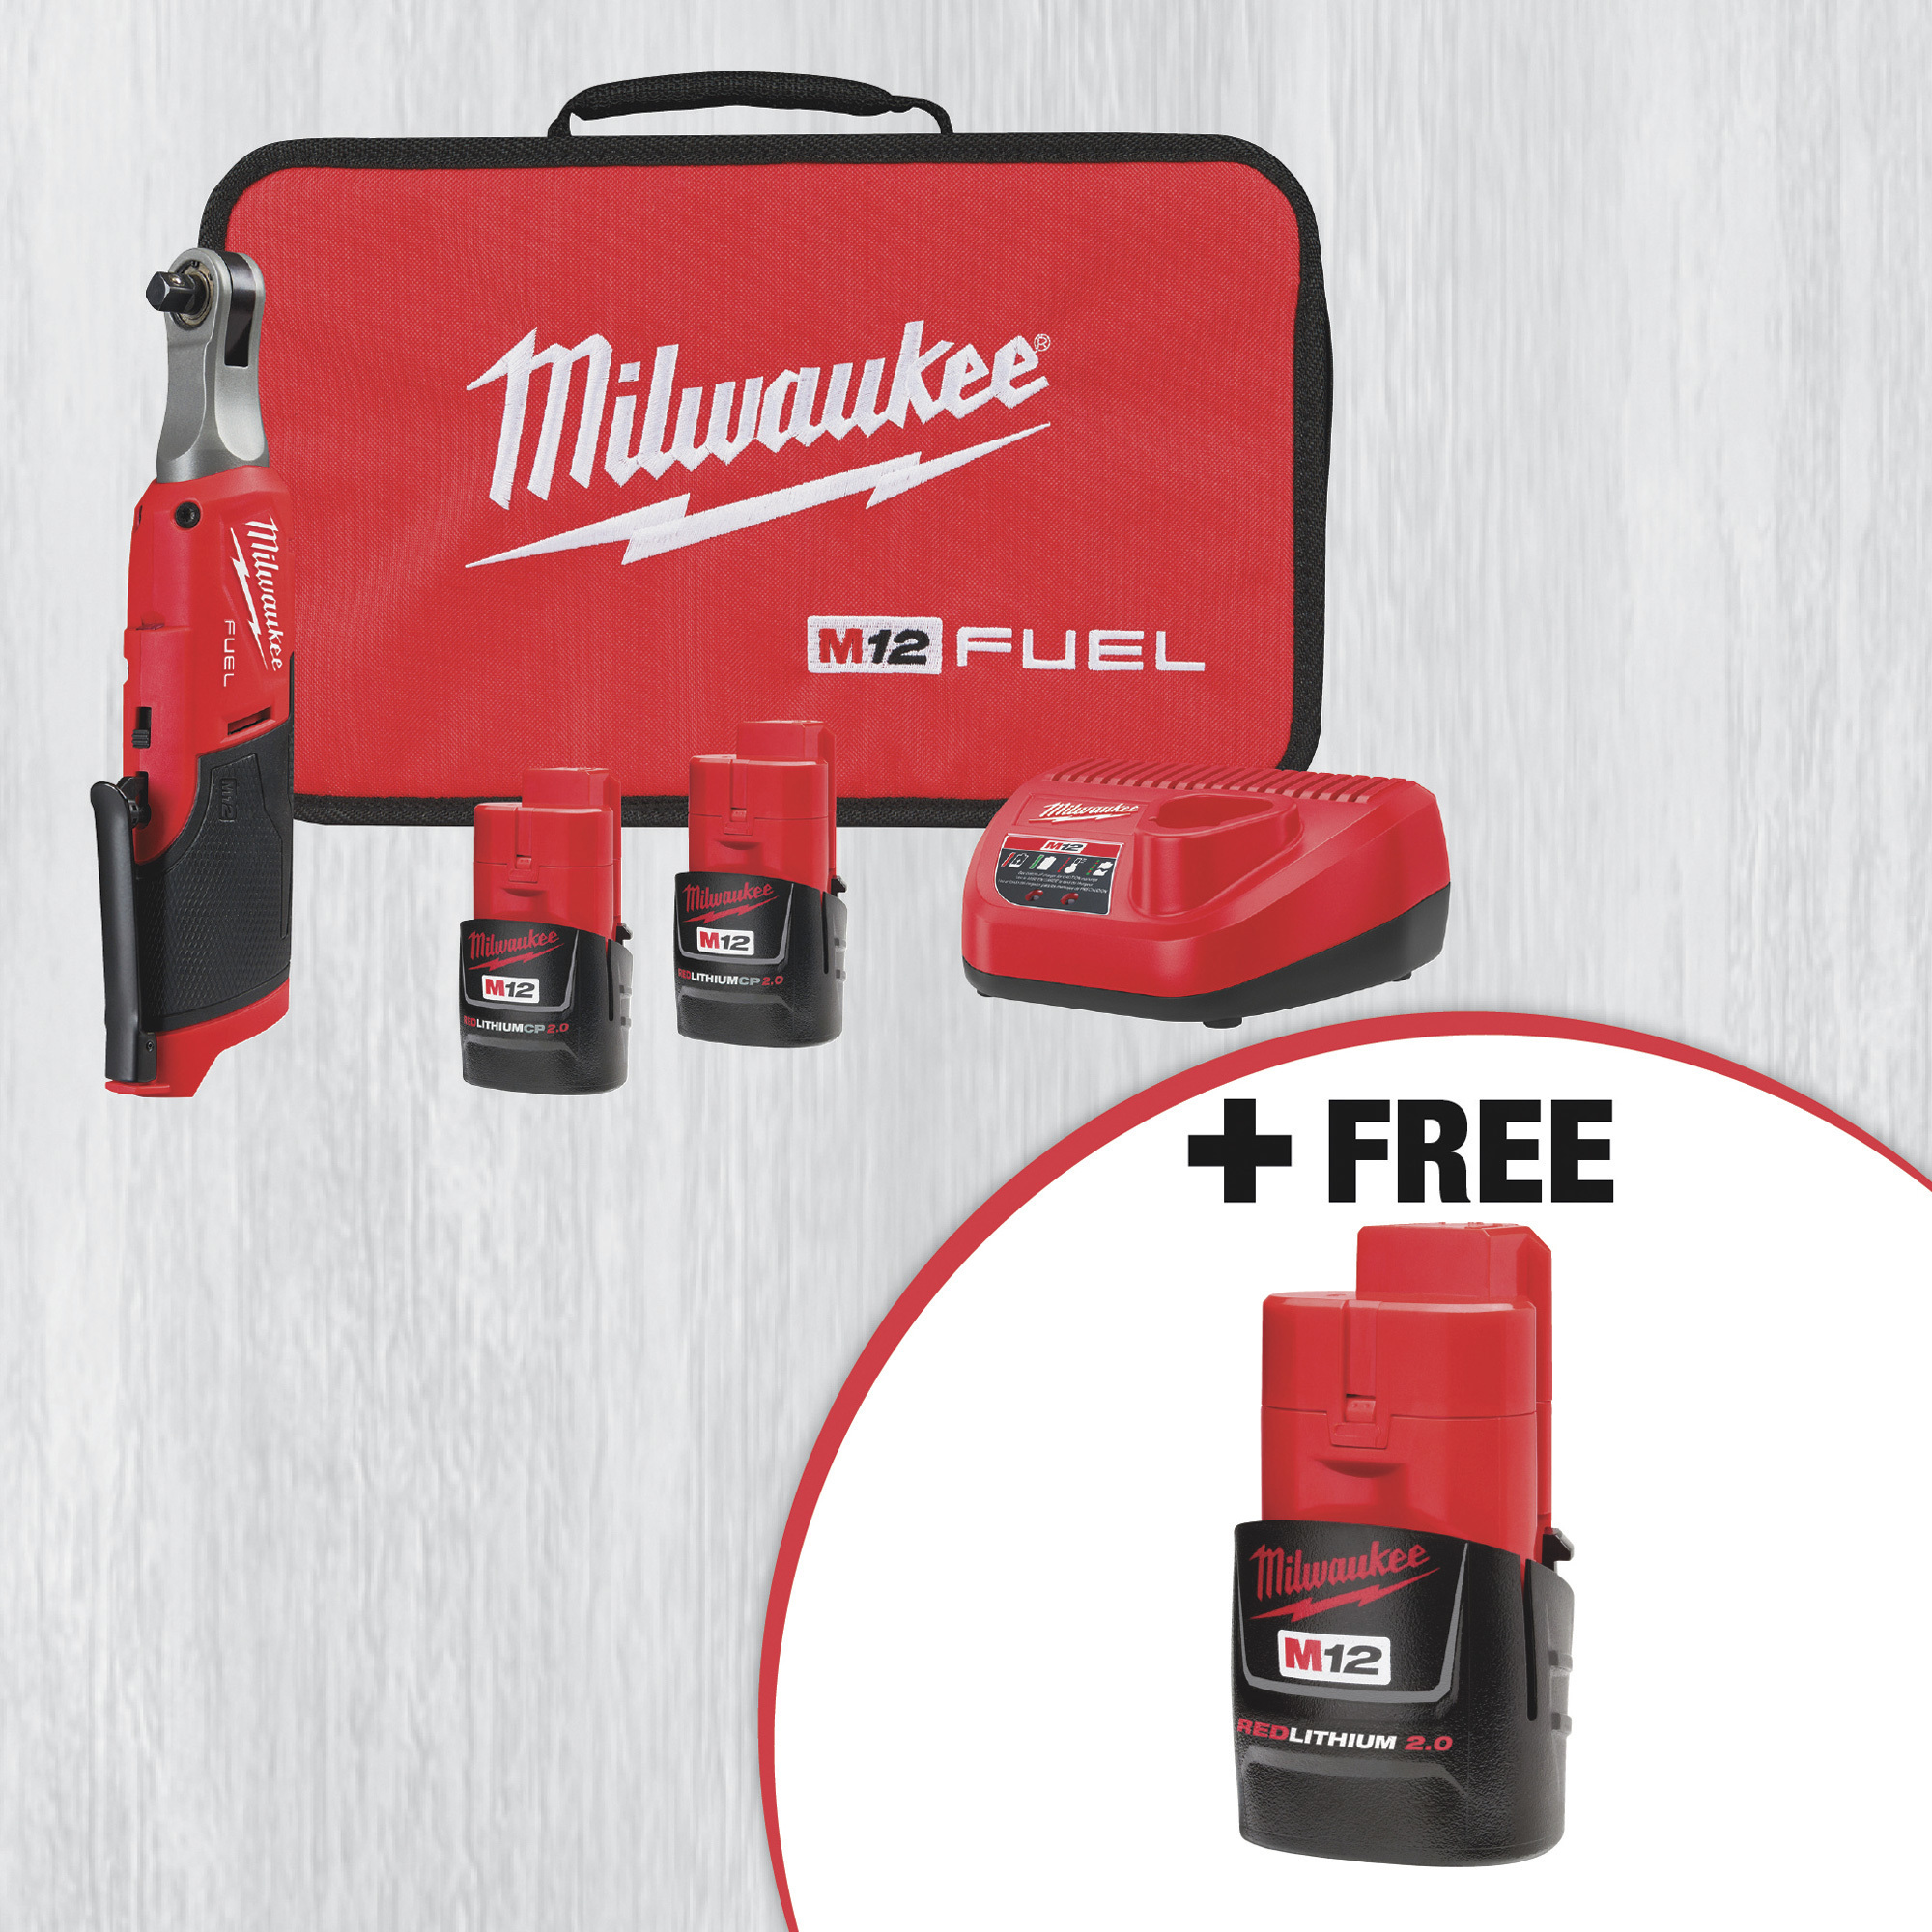 SPECIAL BUY! Milwaukee M12 FUEL 3/8in. High Speed Ratchet Kit with FREE M12  REDLITHIUM CP2.0 Compact Battery Pack! Northern Tool